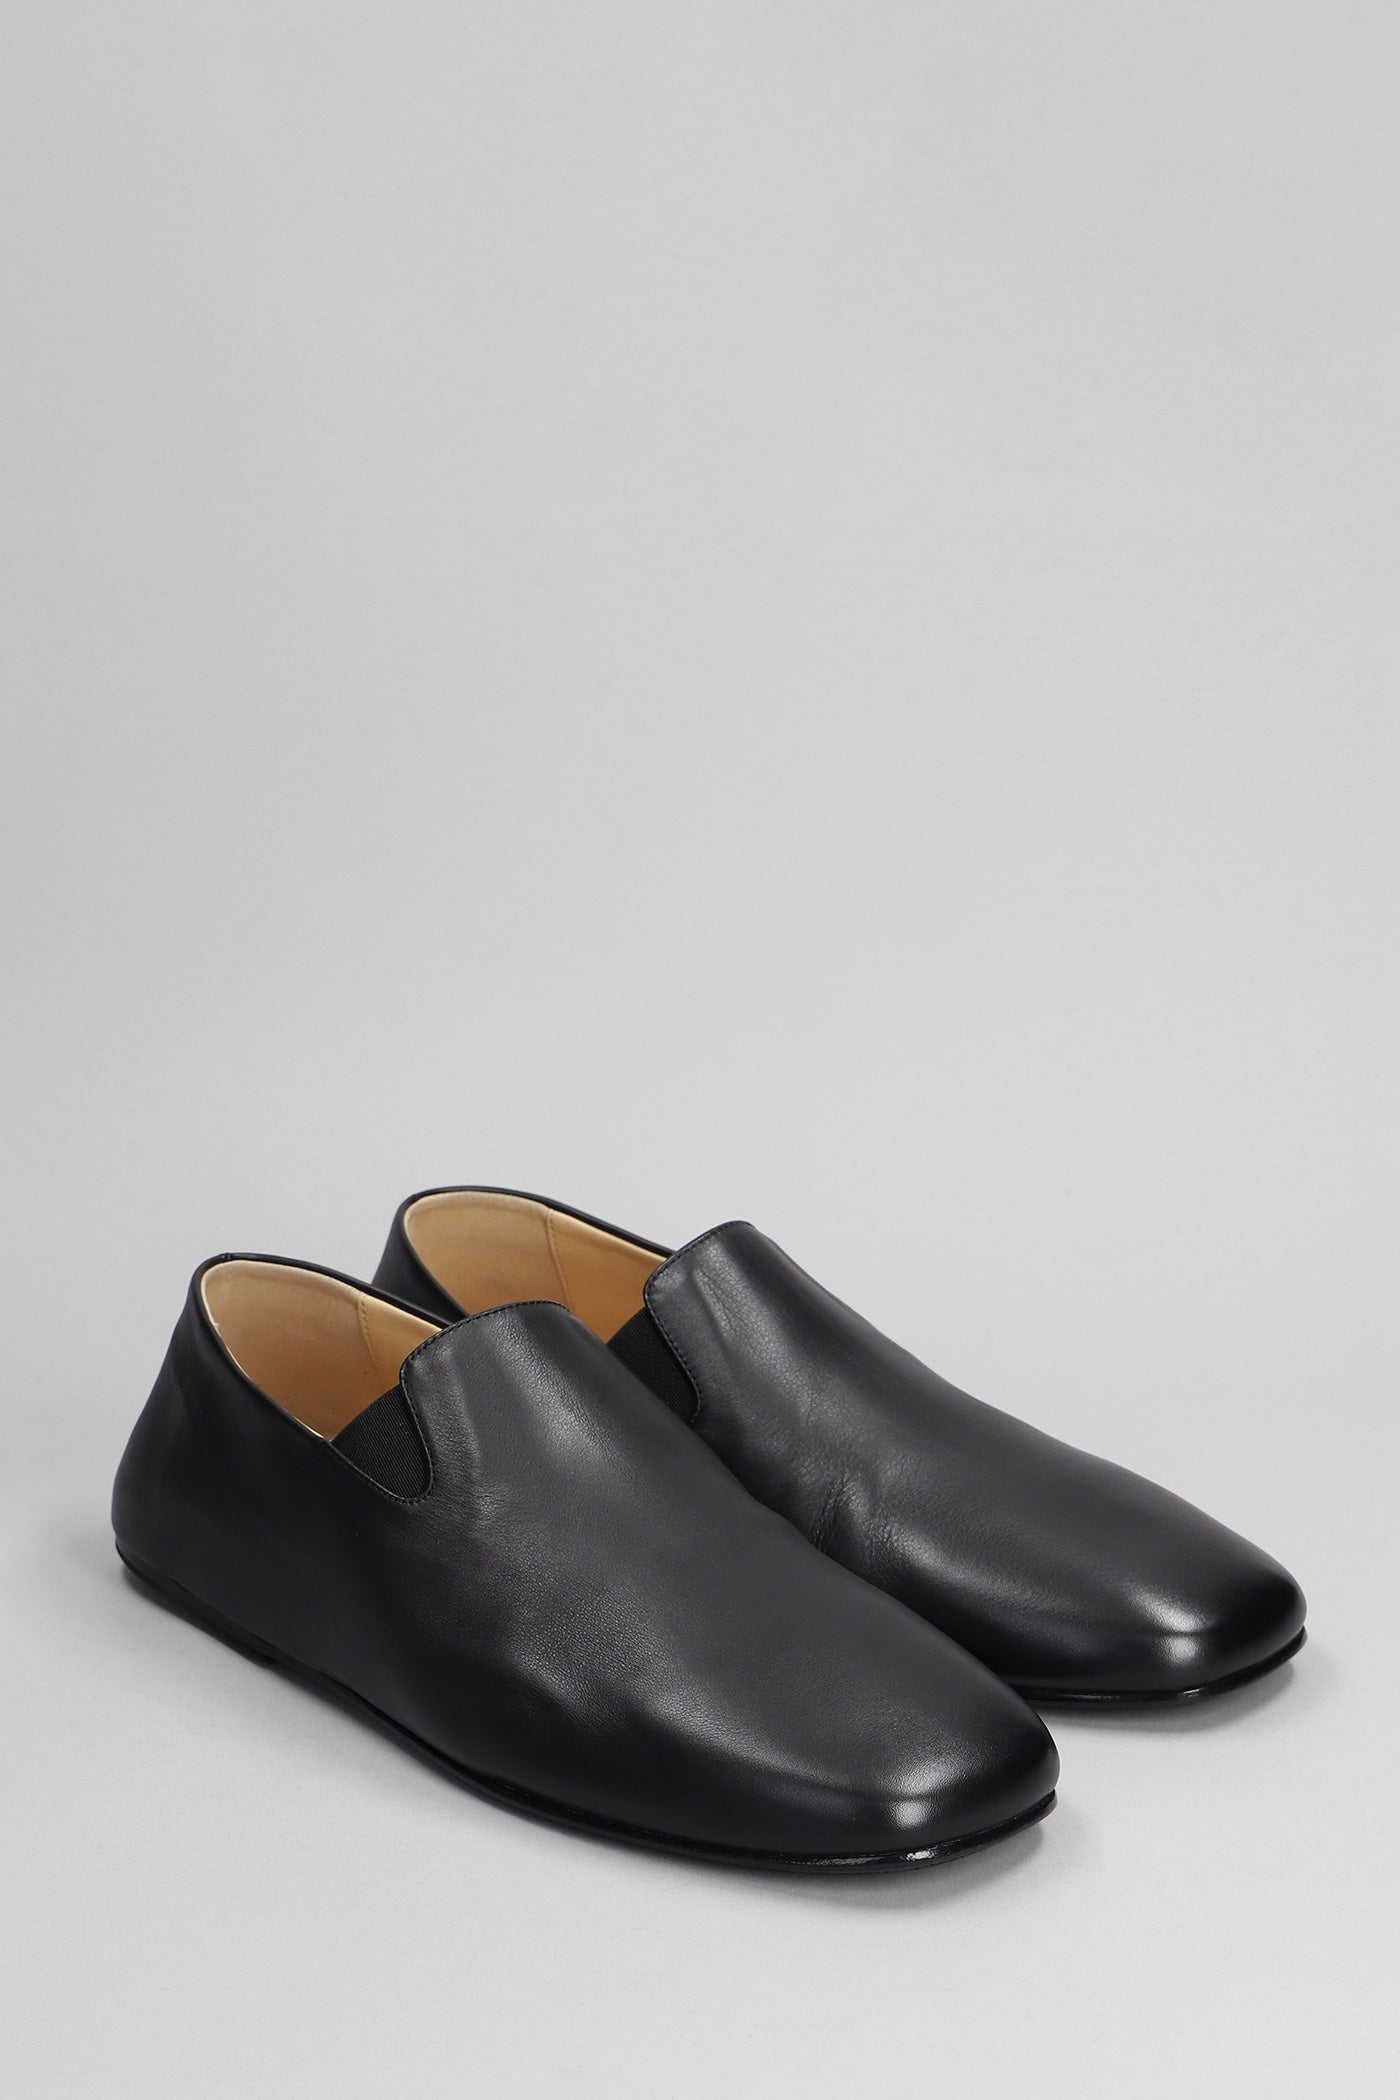 Loafers in black leather